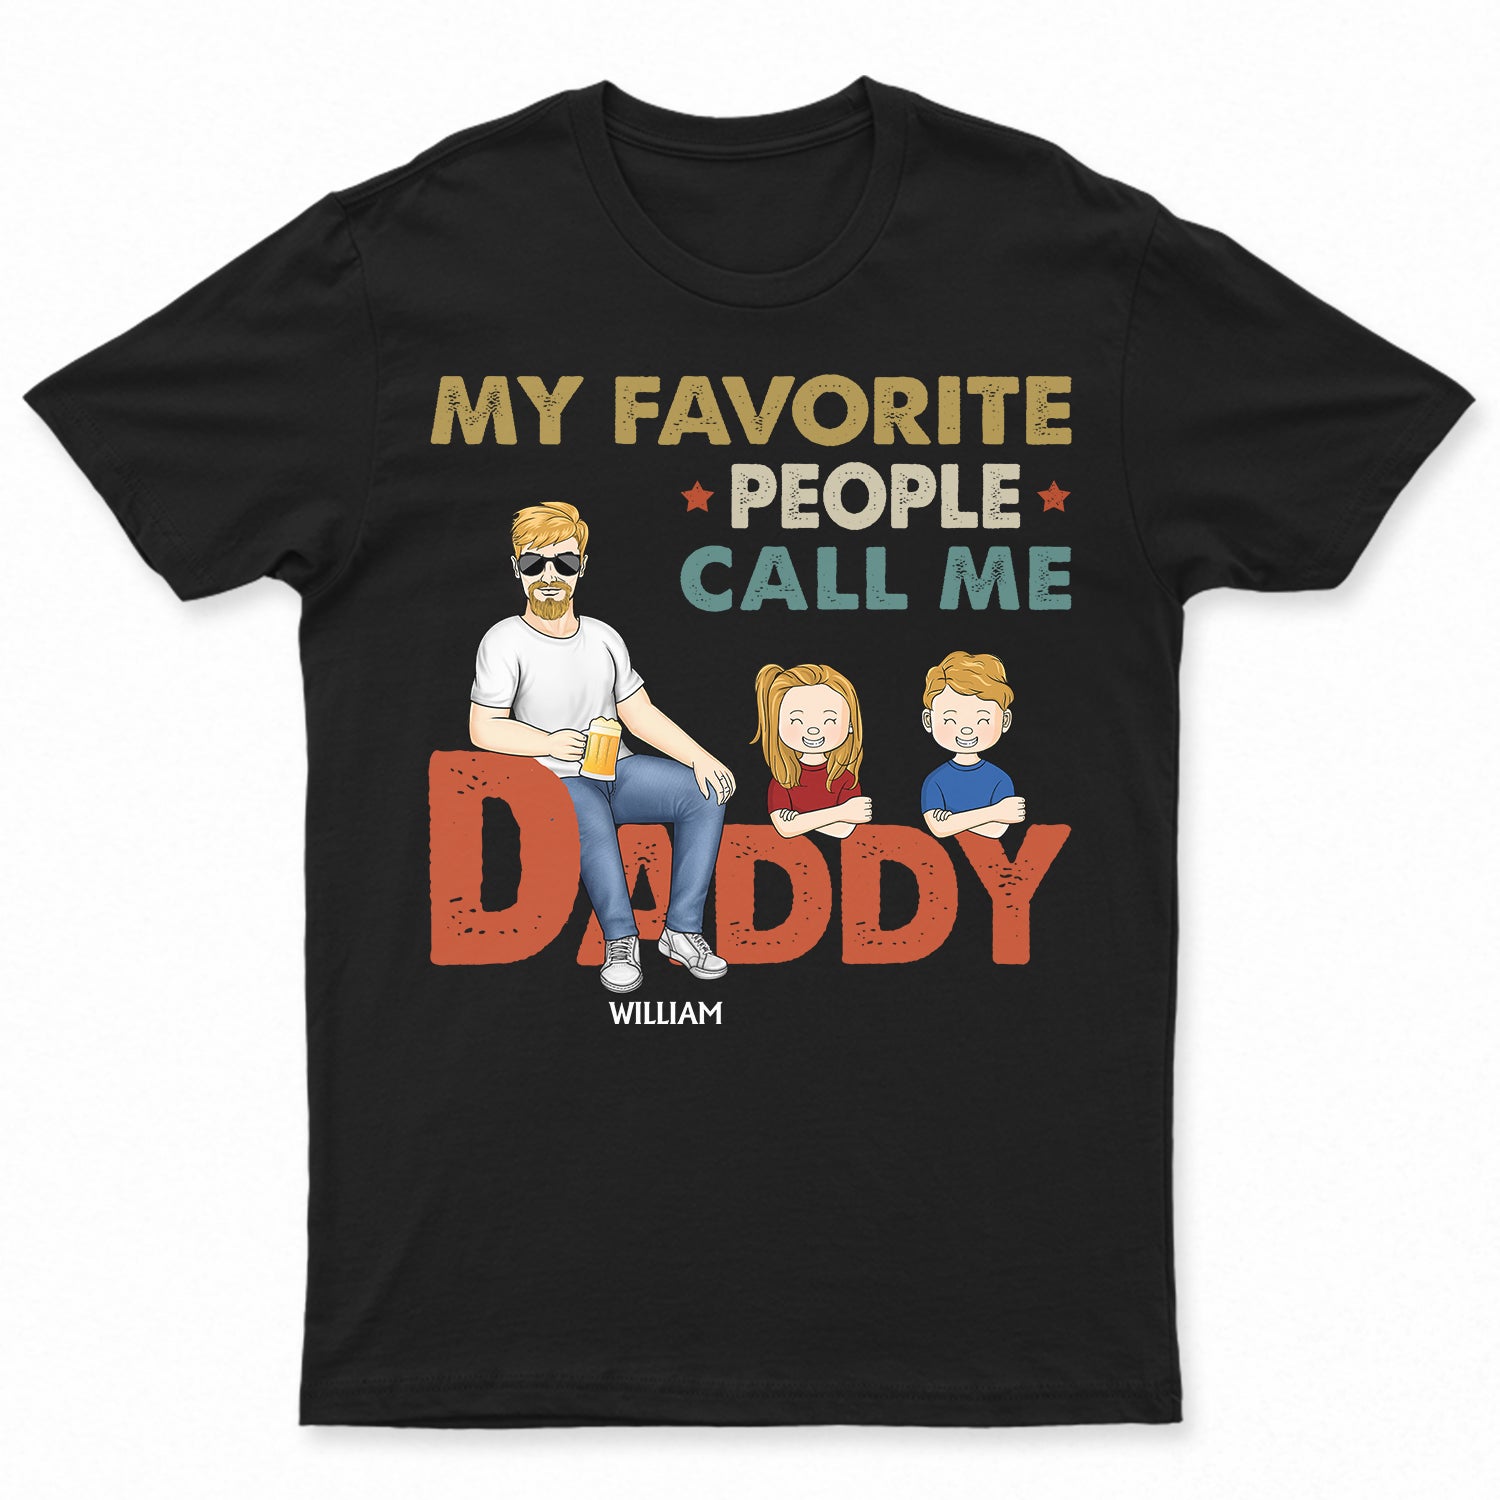 My Favorite People Call Me - Birthday Gift For Dad, Father, Grandpa - Personalized Custom T Shirt